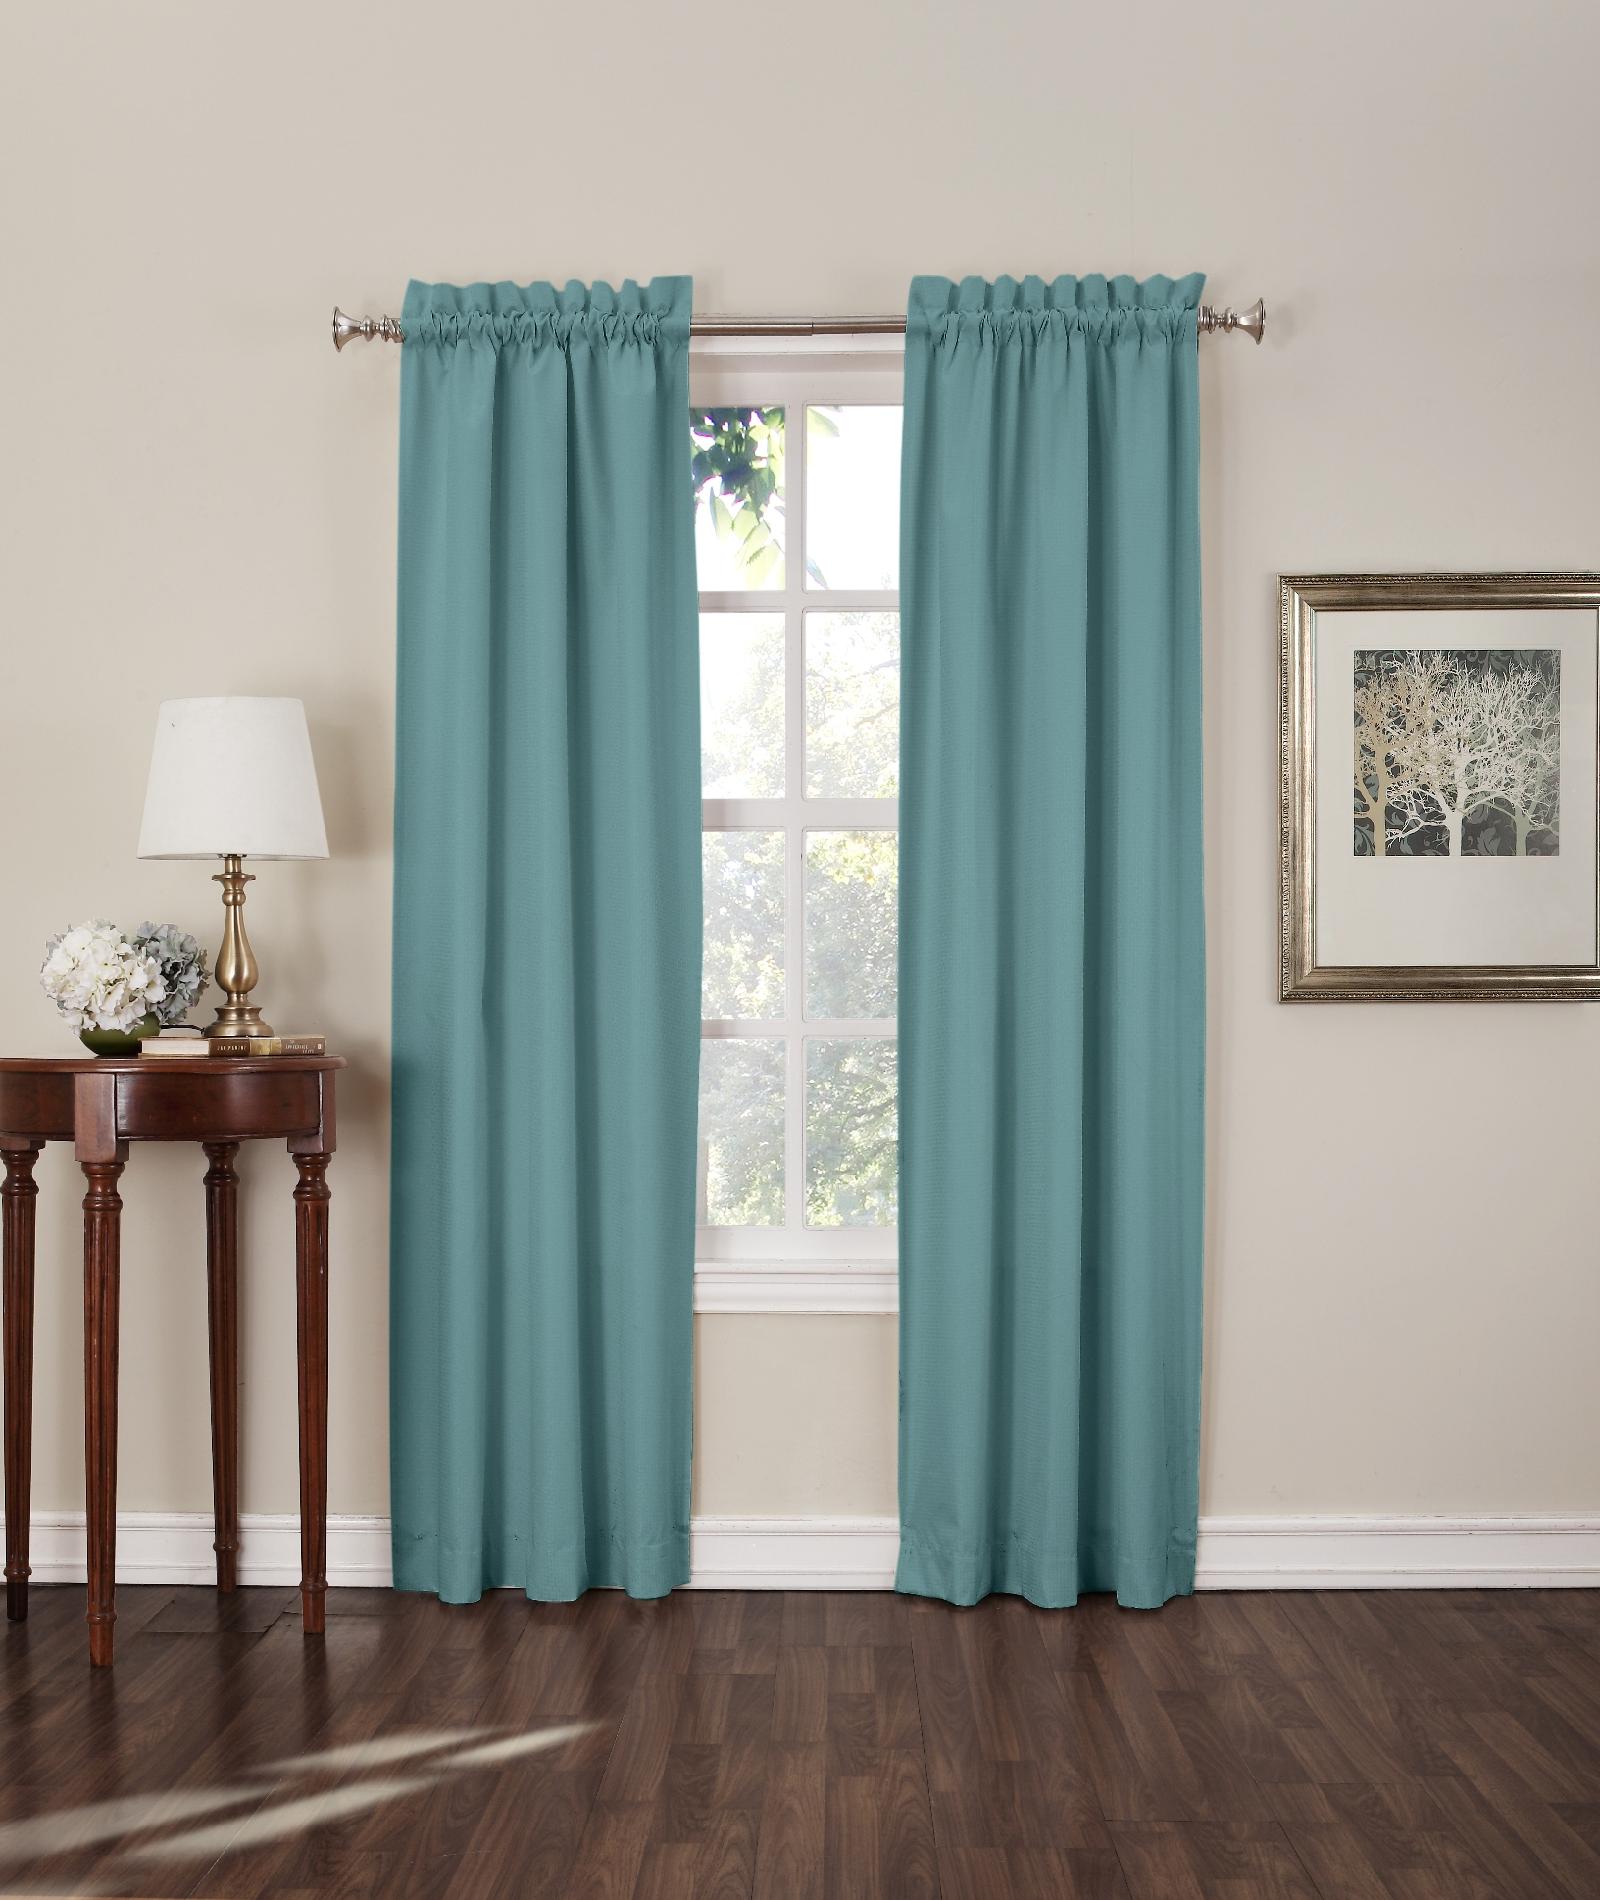 Shawn 2-Pack Blackout Curtain Panels Mineral